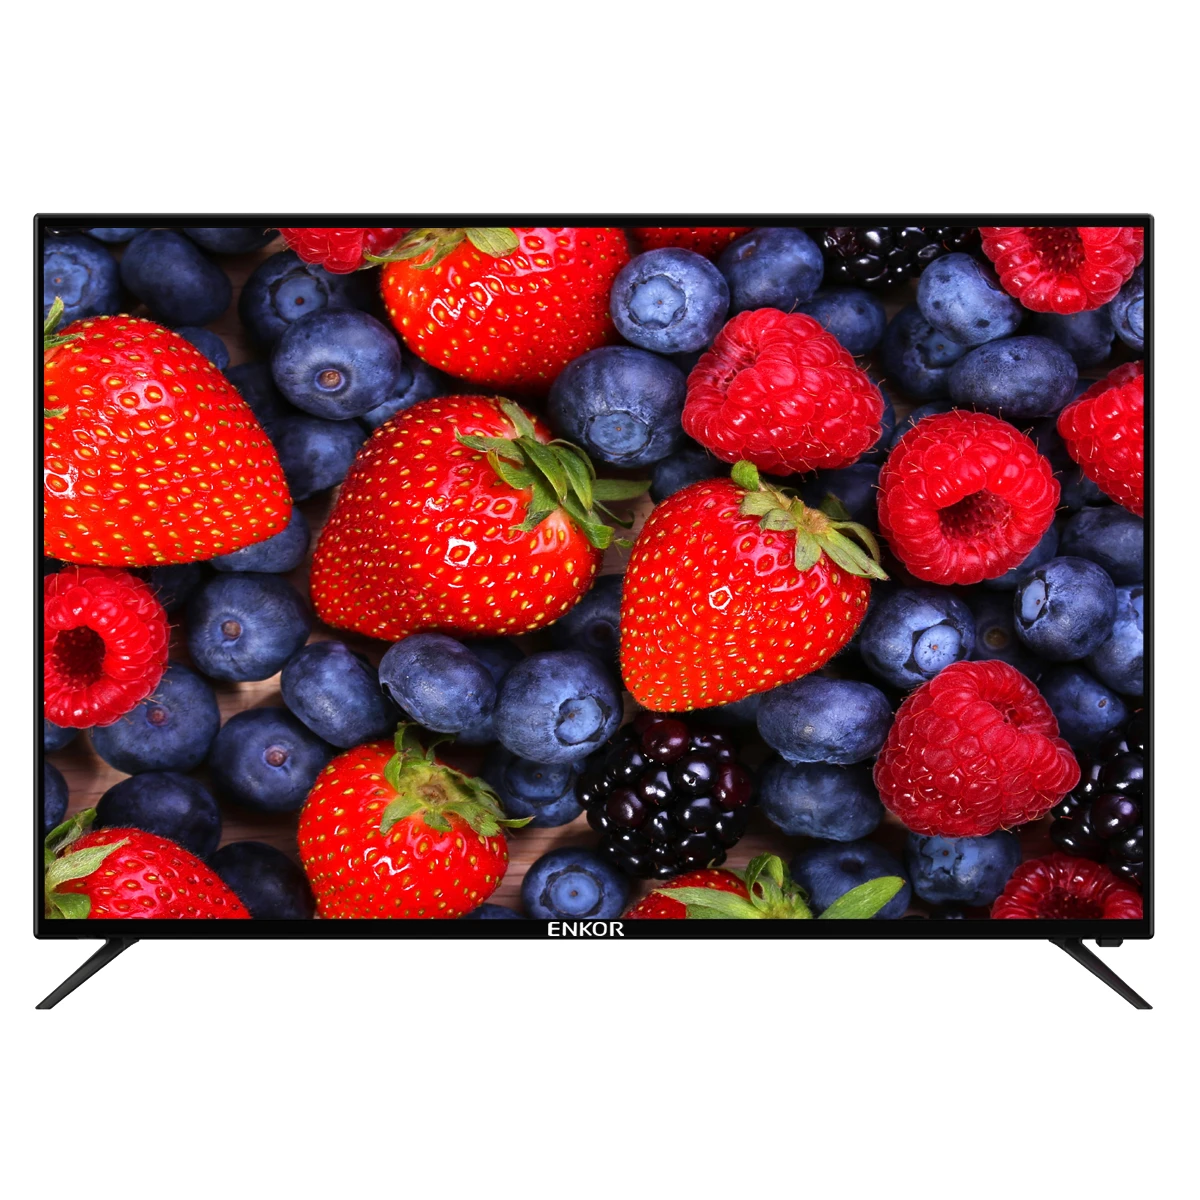 Promotion 65 75 78 85 Inch Advertising Flat Screen Television Size Tv 4K Android Big Hd 55 Inch Smart Wifi Tv Television